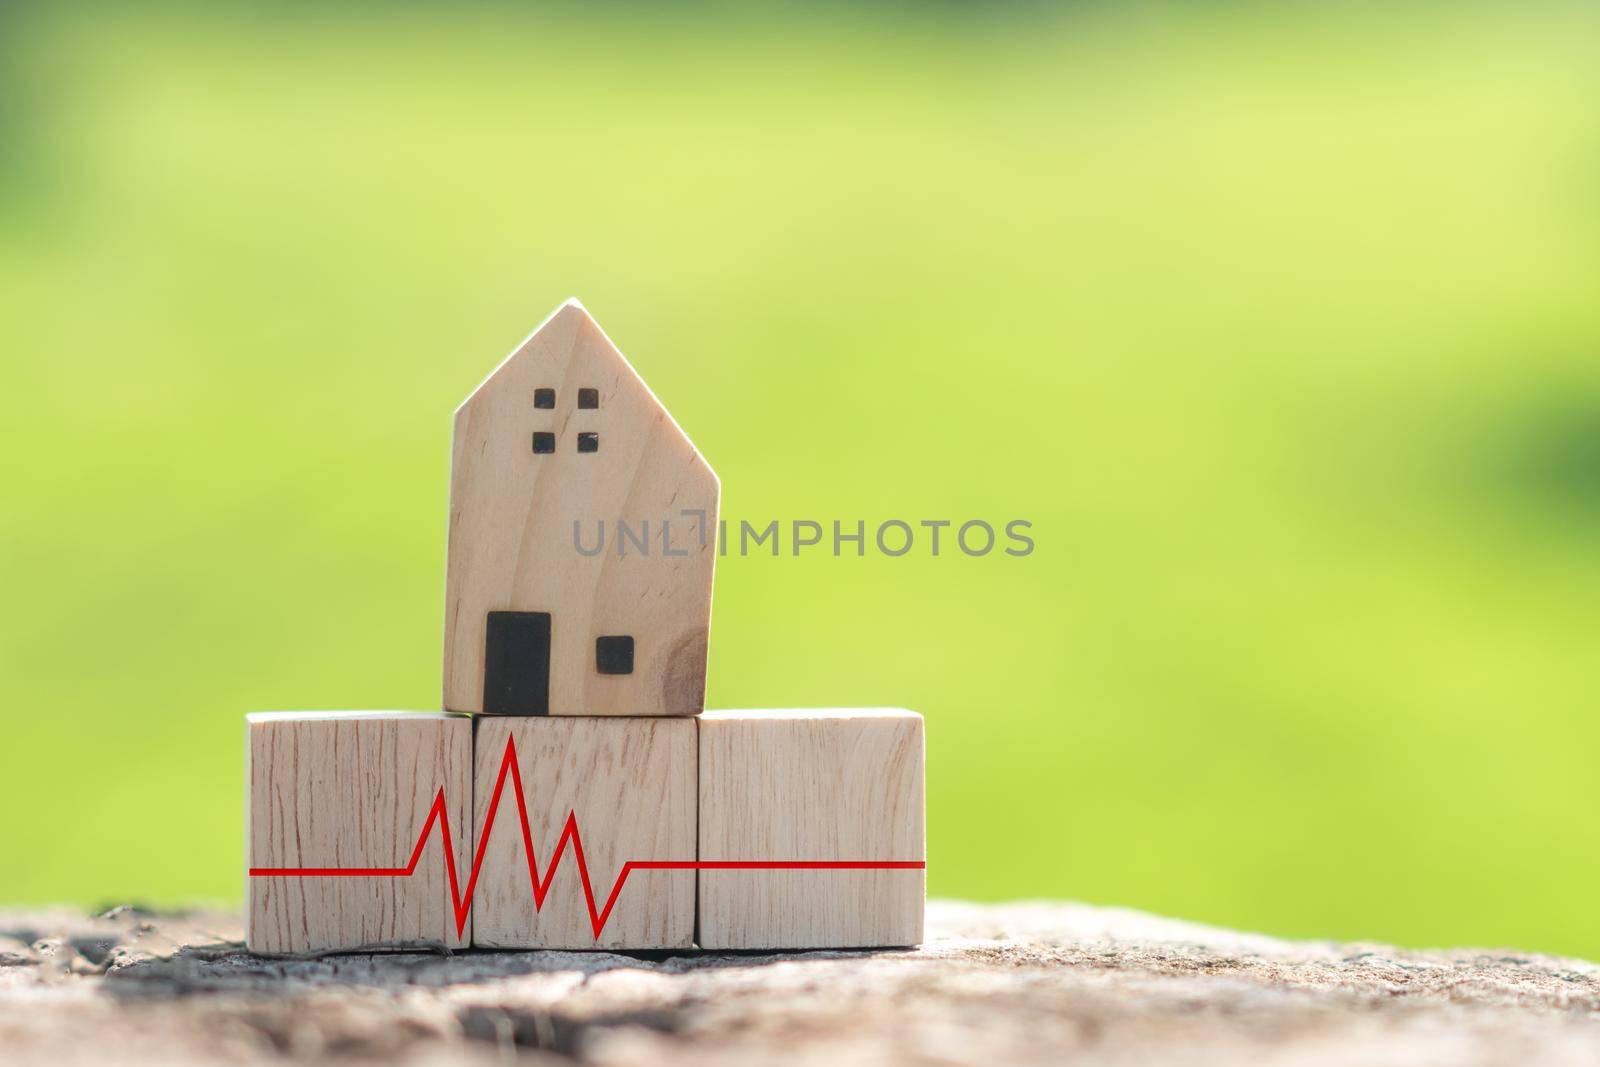 The concept of a crisis situation time financial difficulty is represented by a wooden cube with a house model and a heart pulse indication.